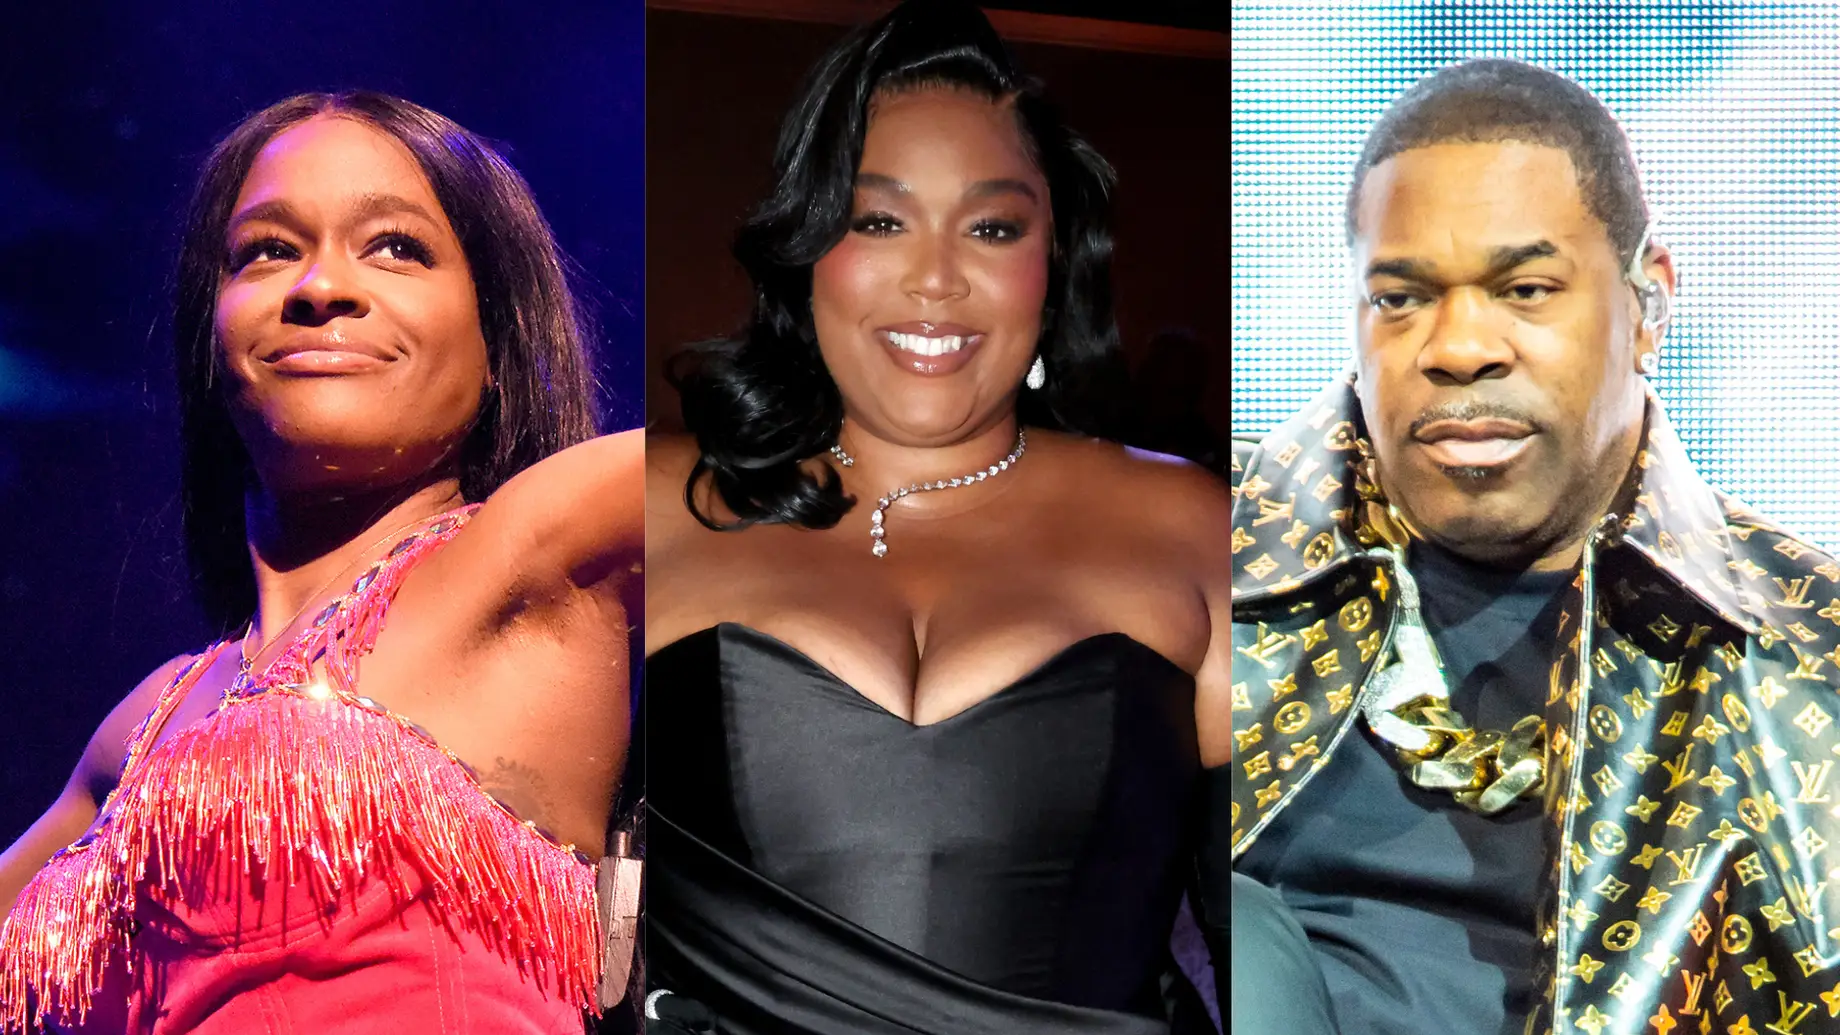 Azealia Banks Offers Apology to Lizzo, Insults ‘Severely Overweight’ Busta Rhymes